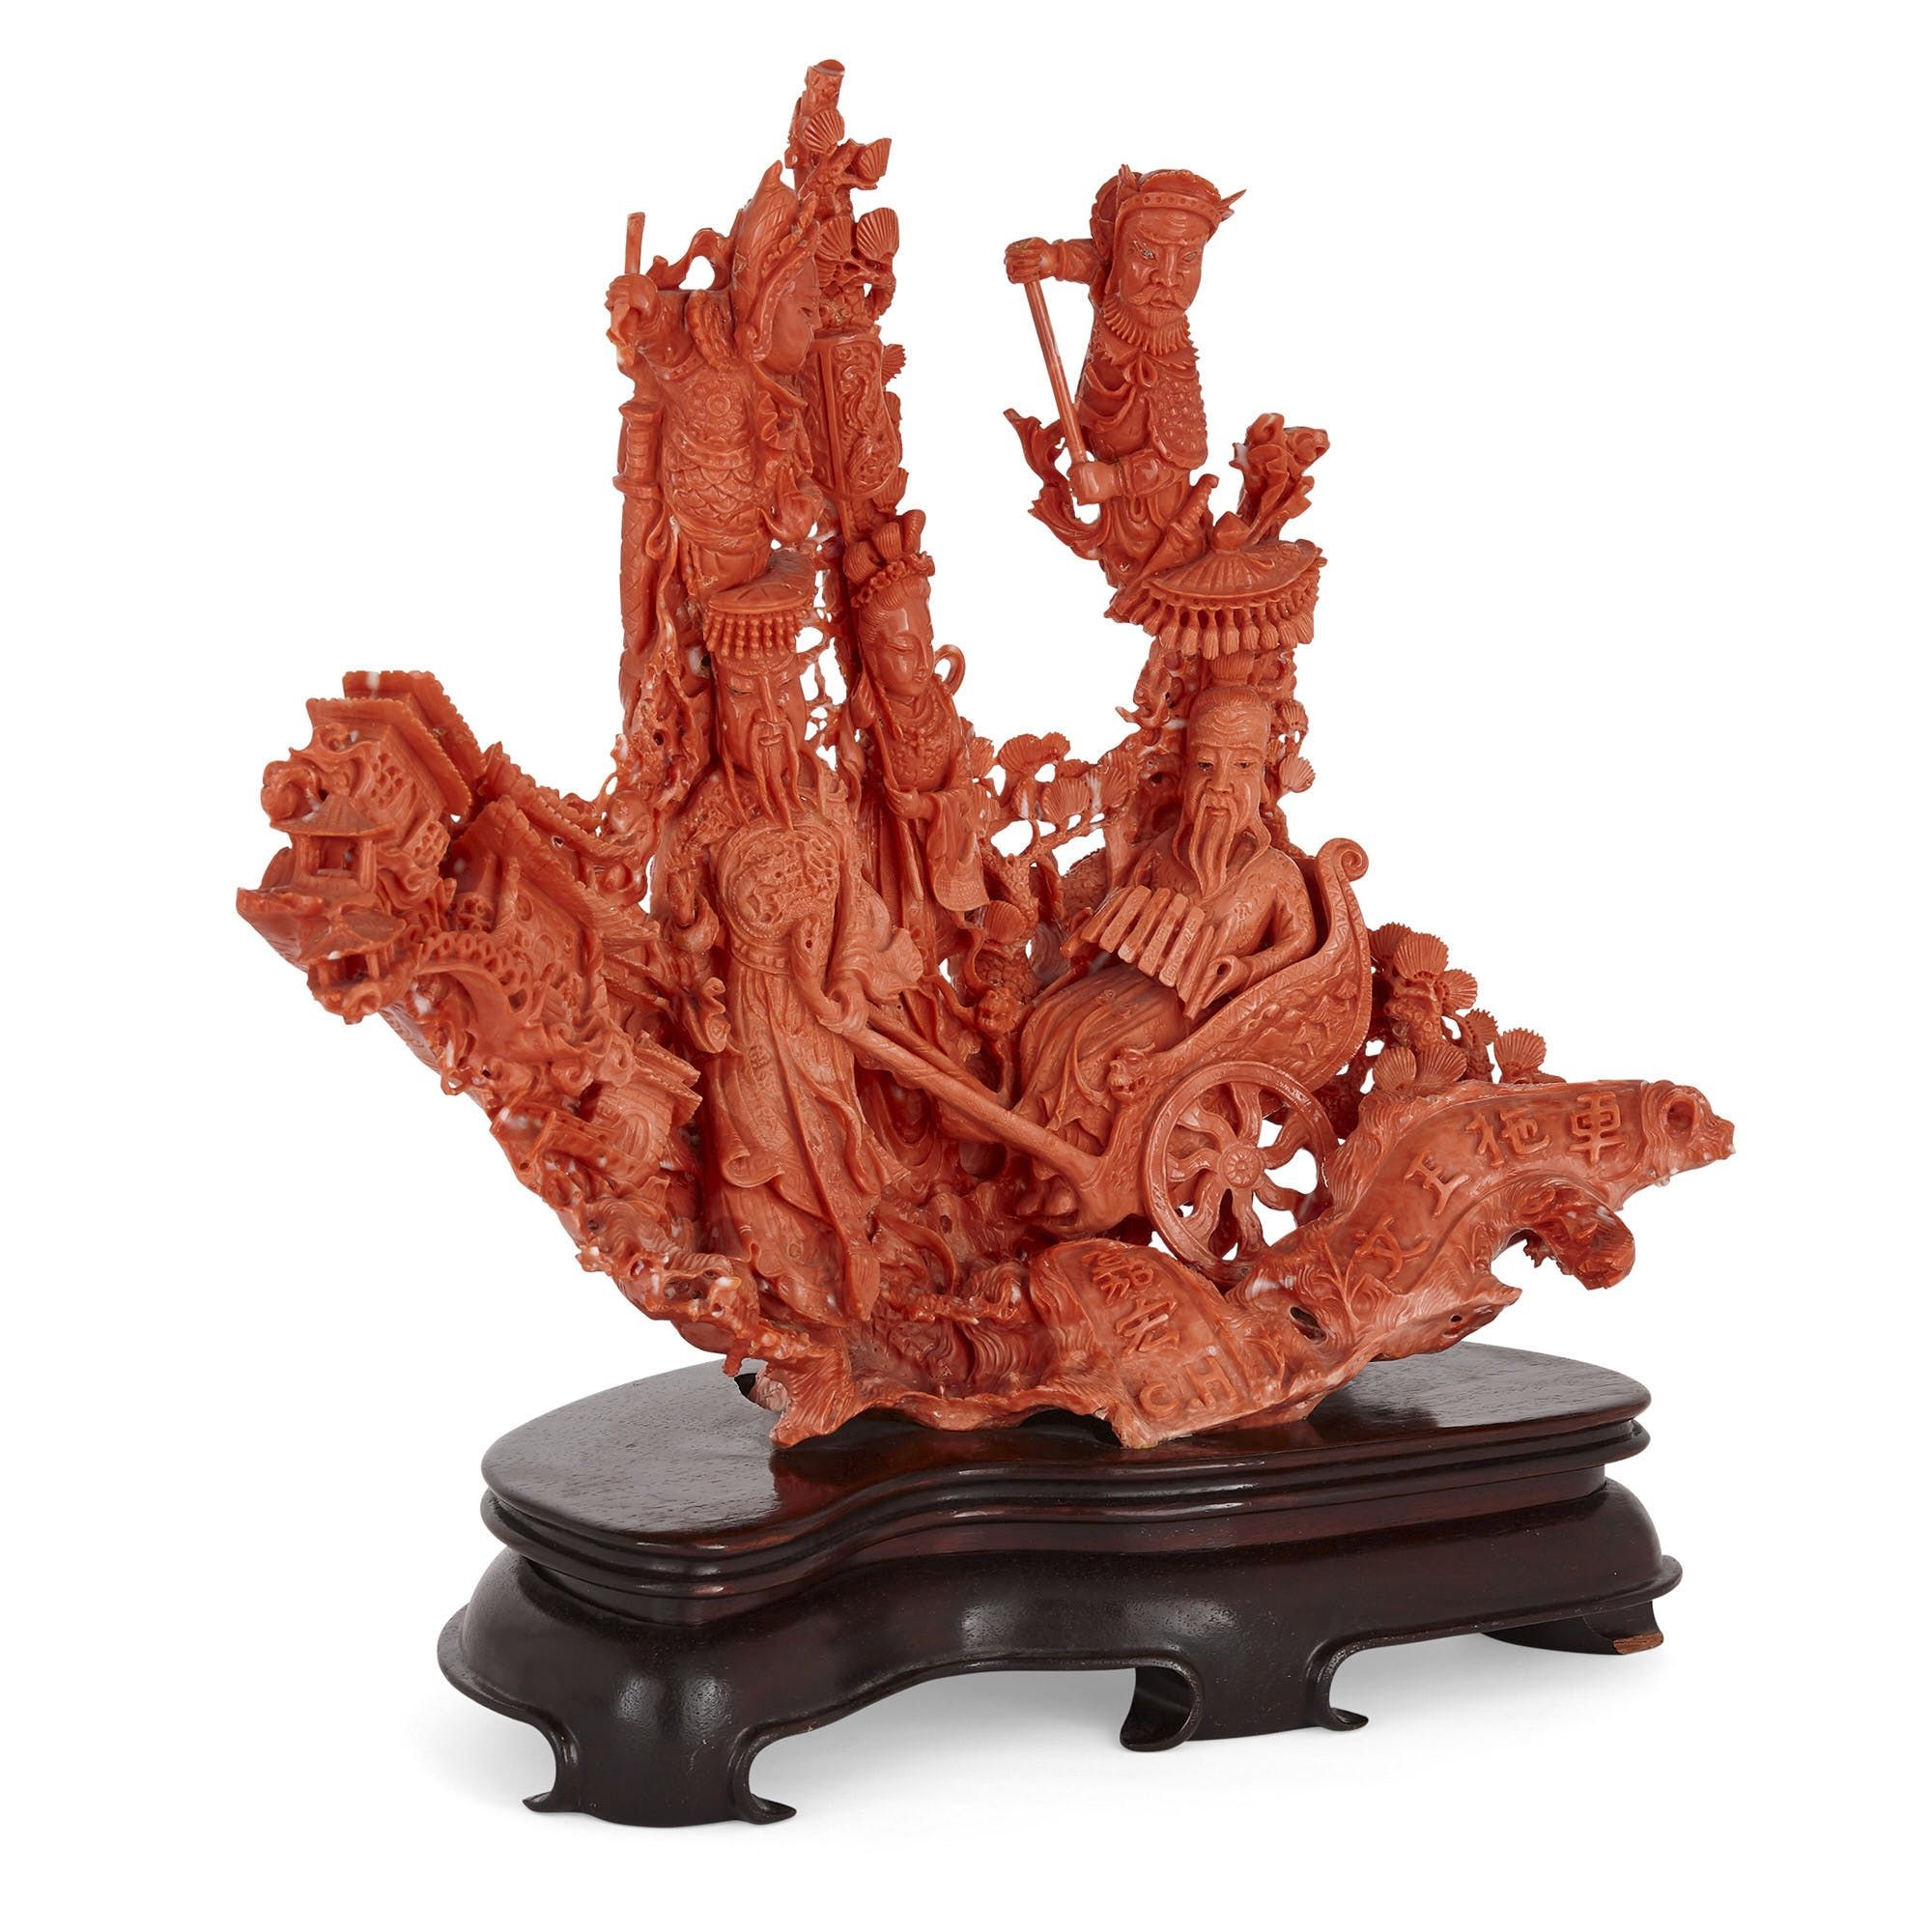 Exceptional Chinese carved red coral, Mayfair Gallery, Artistic masterpiece, Precious coral jewelry, 2000x2000 HD Handy